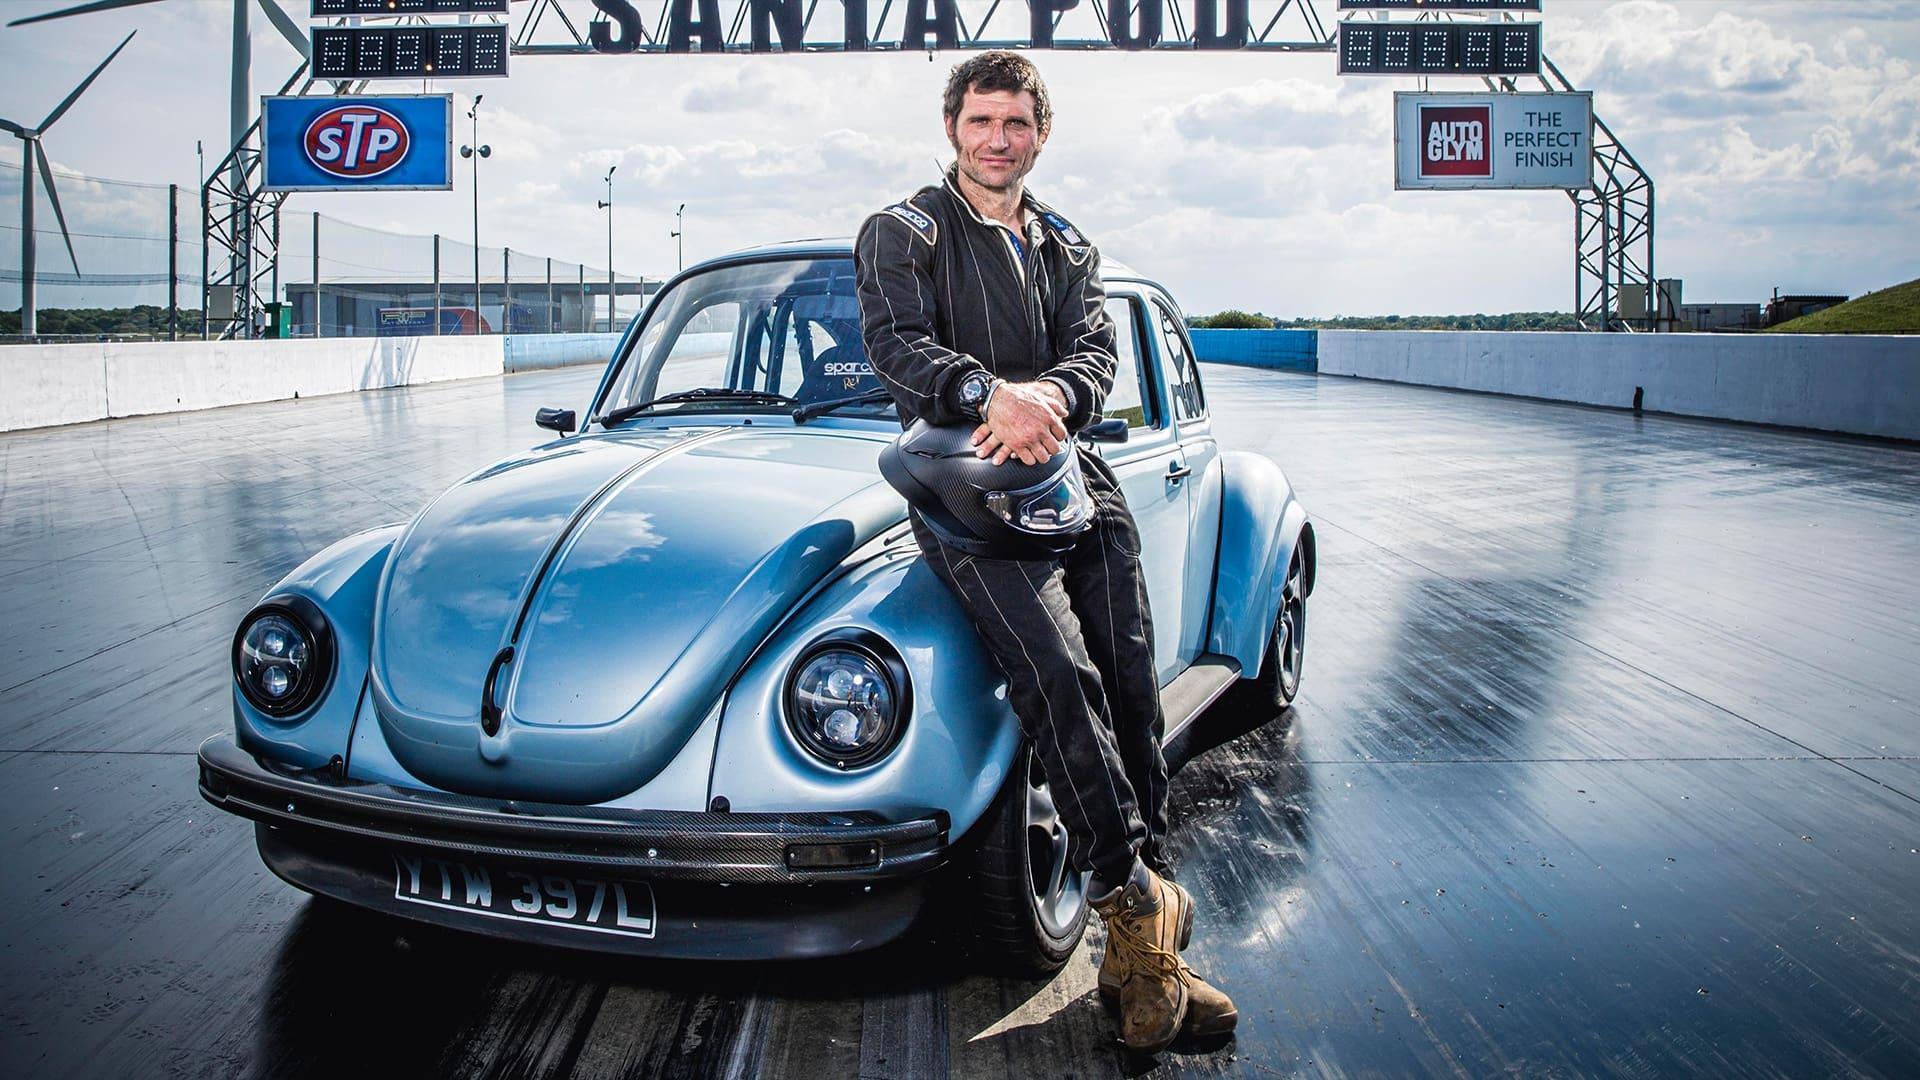 Guy Martin: The World's Fastest Electric Car? backdrop